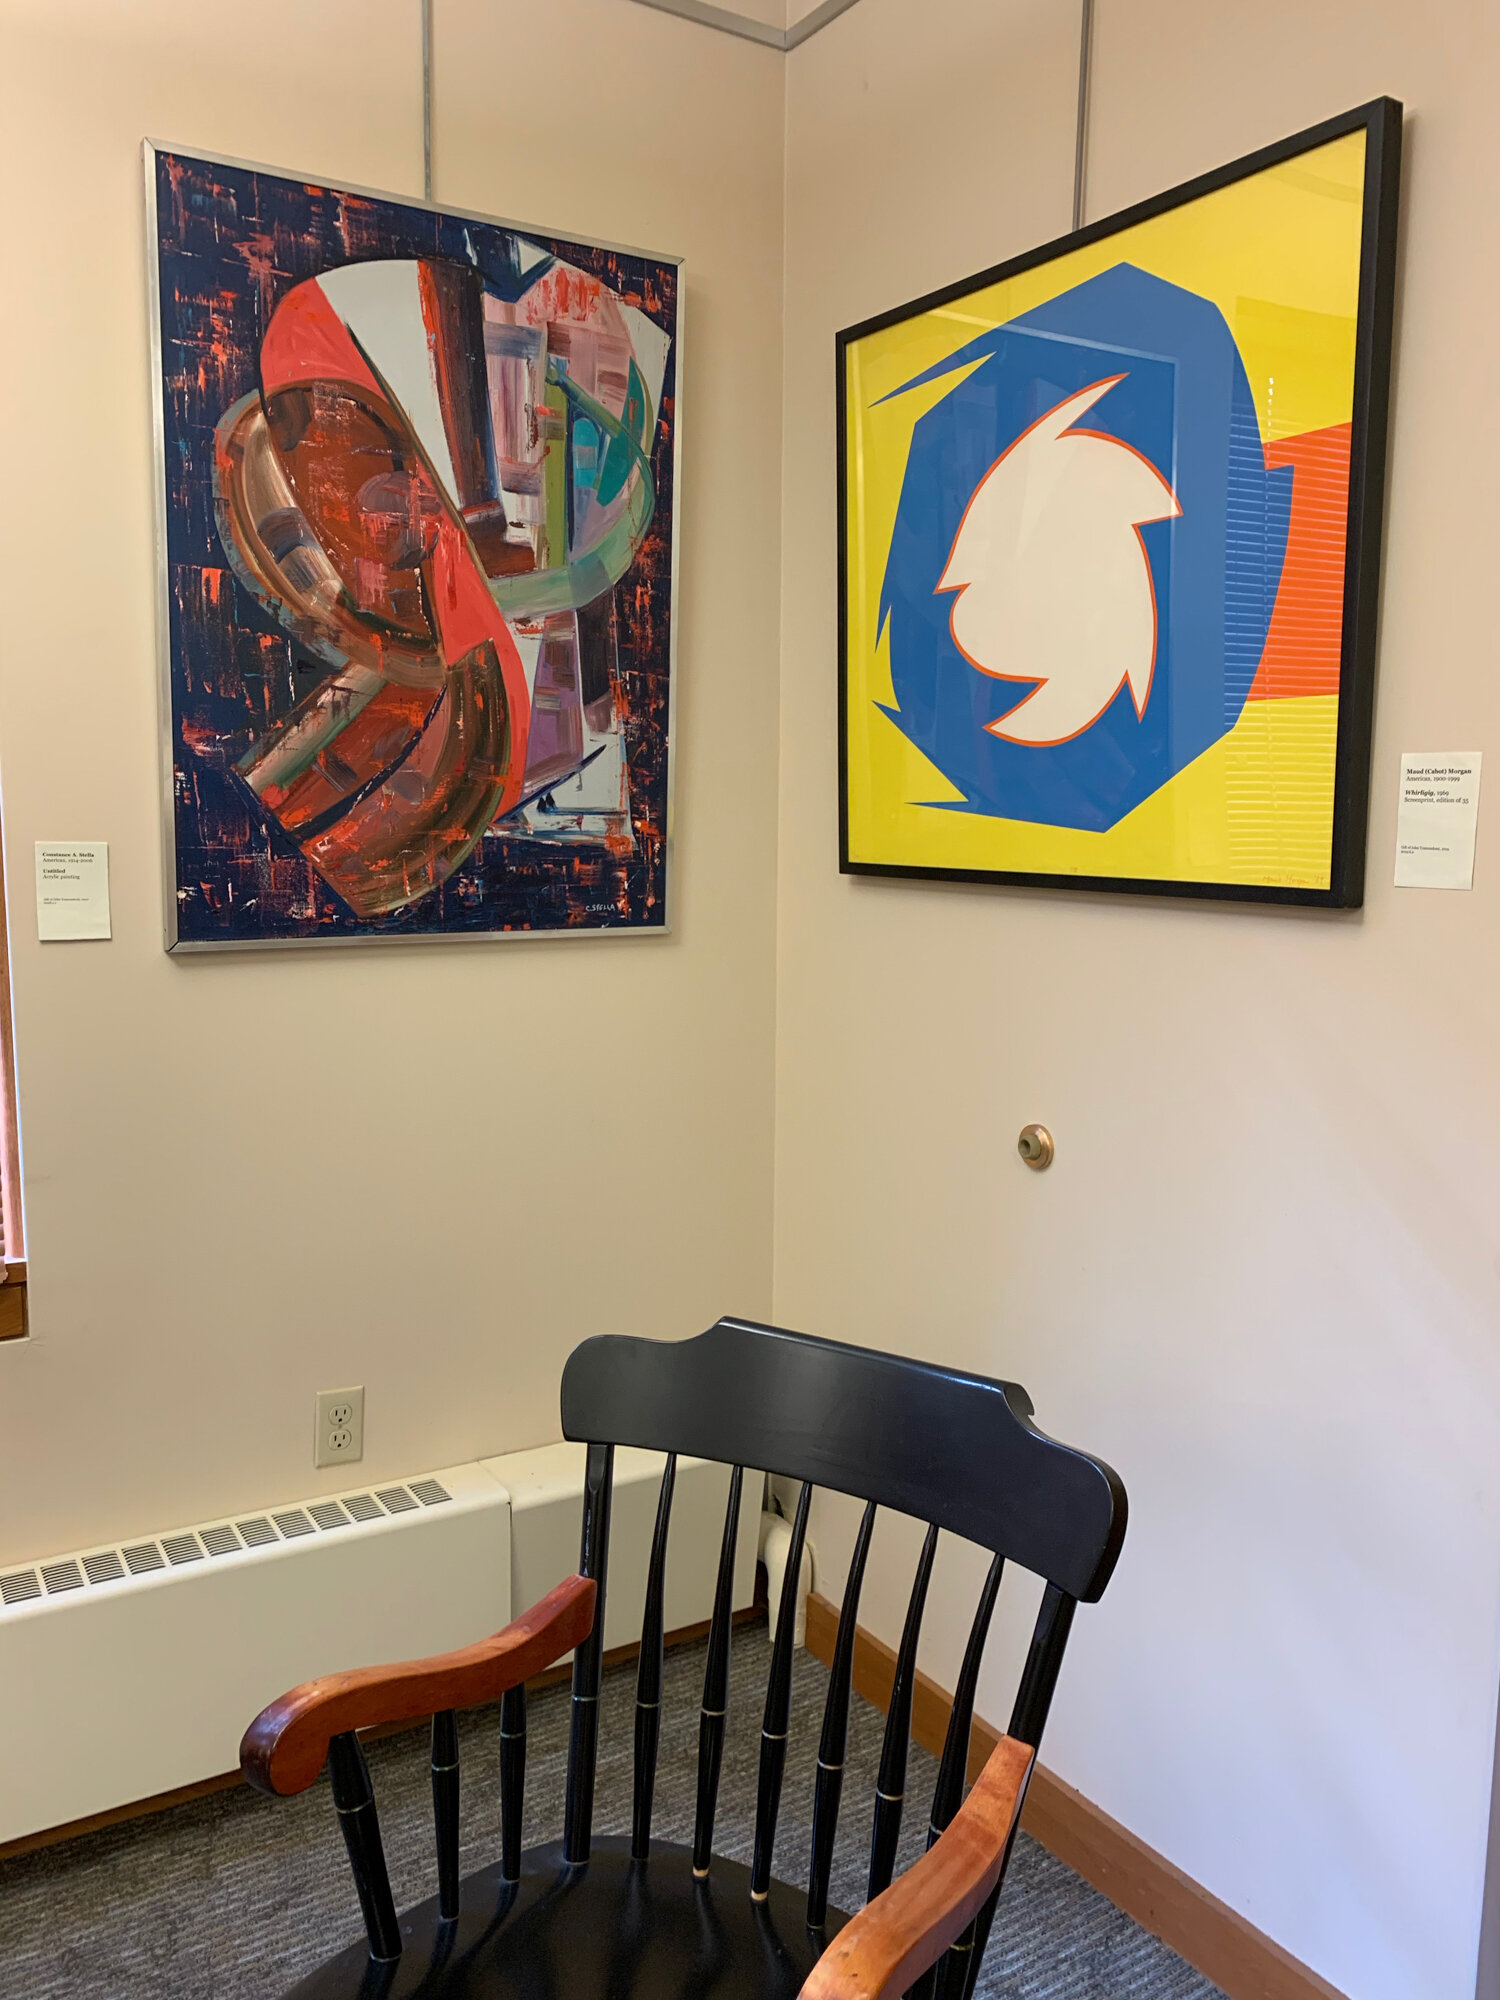 Artworks in the collection of the Converse Memorial Building, Malden, MA